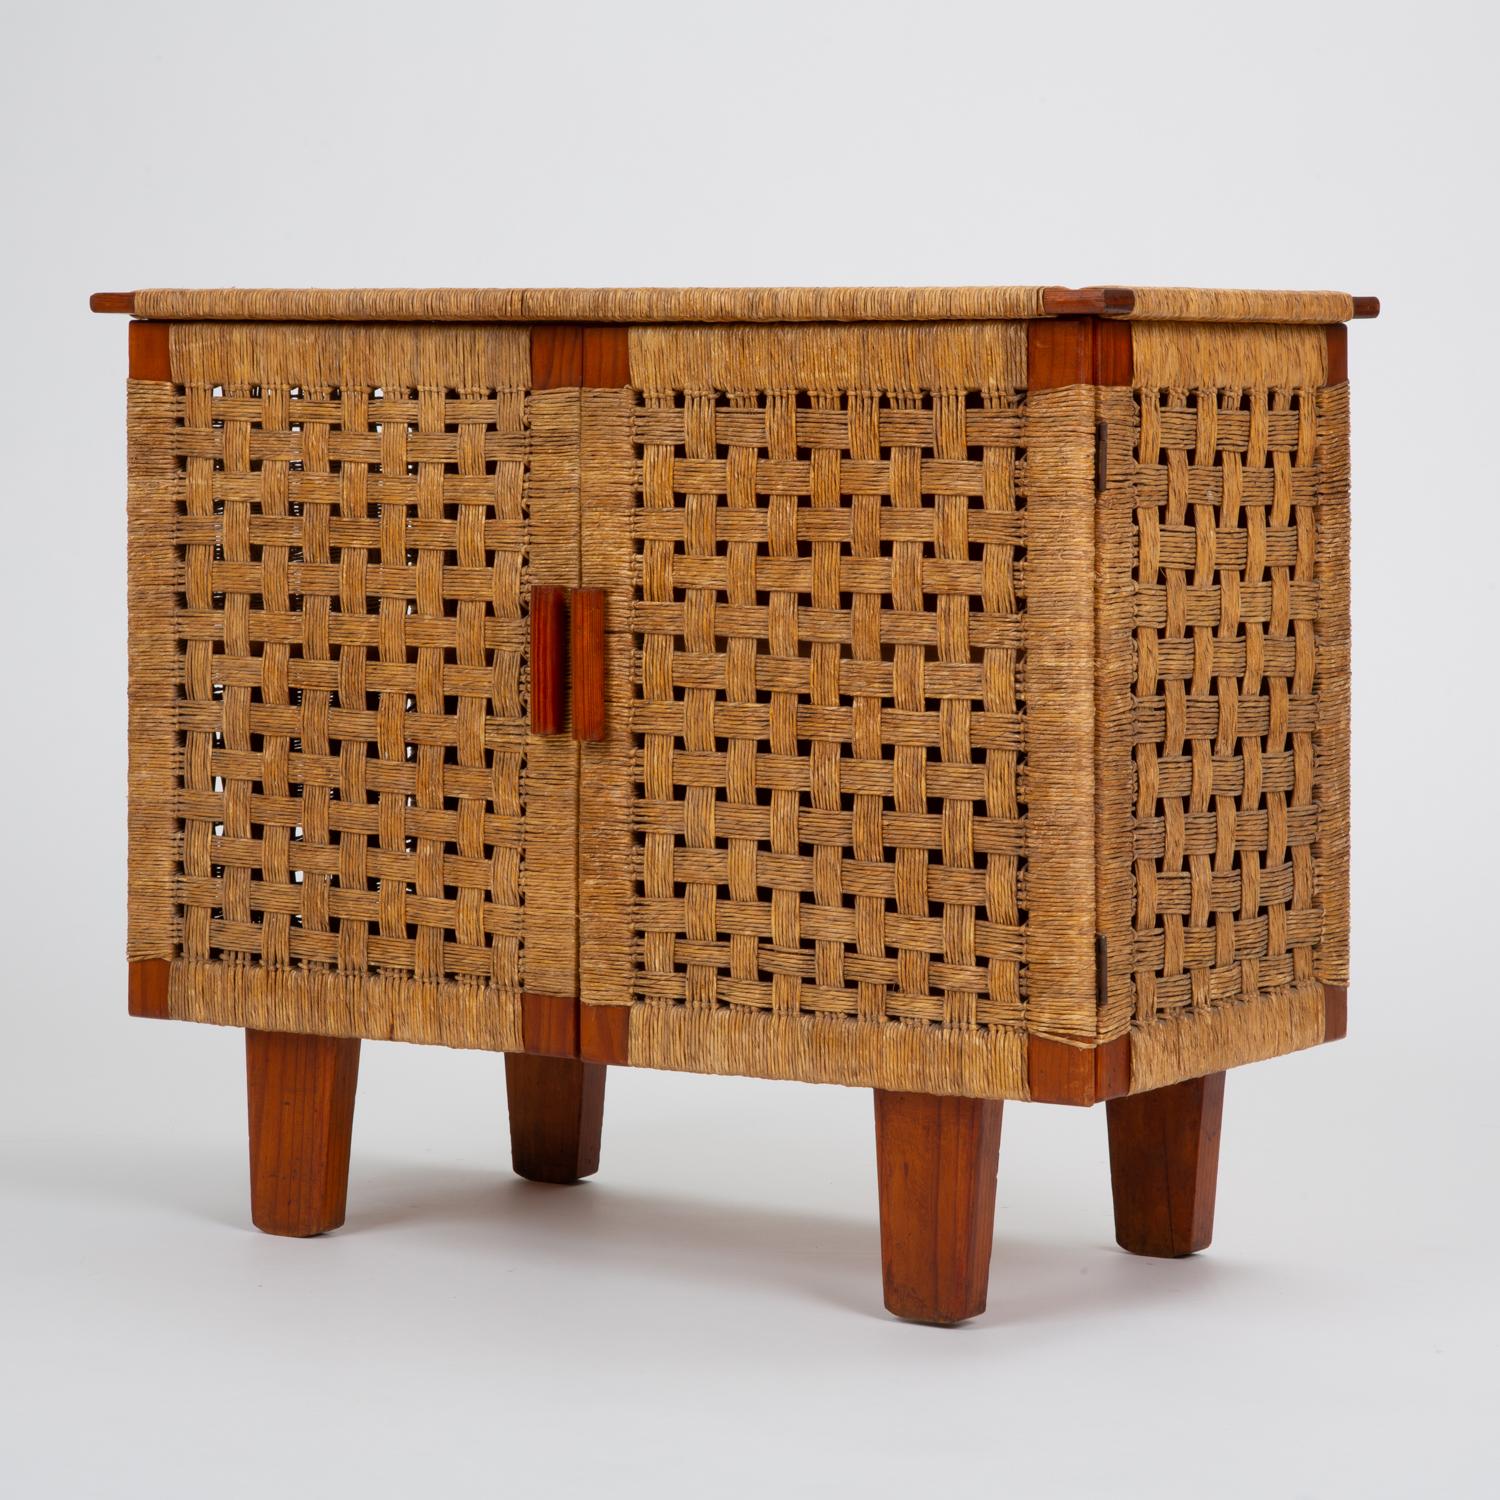 Bauhaus-trained, Mexico City-based Michael van Beuren created highly functional modern design inspired by Mexican vernacular styles and materials. This example is a small credenza with a mahogany frame. A multi-strand basket weave of rattan cord